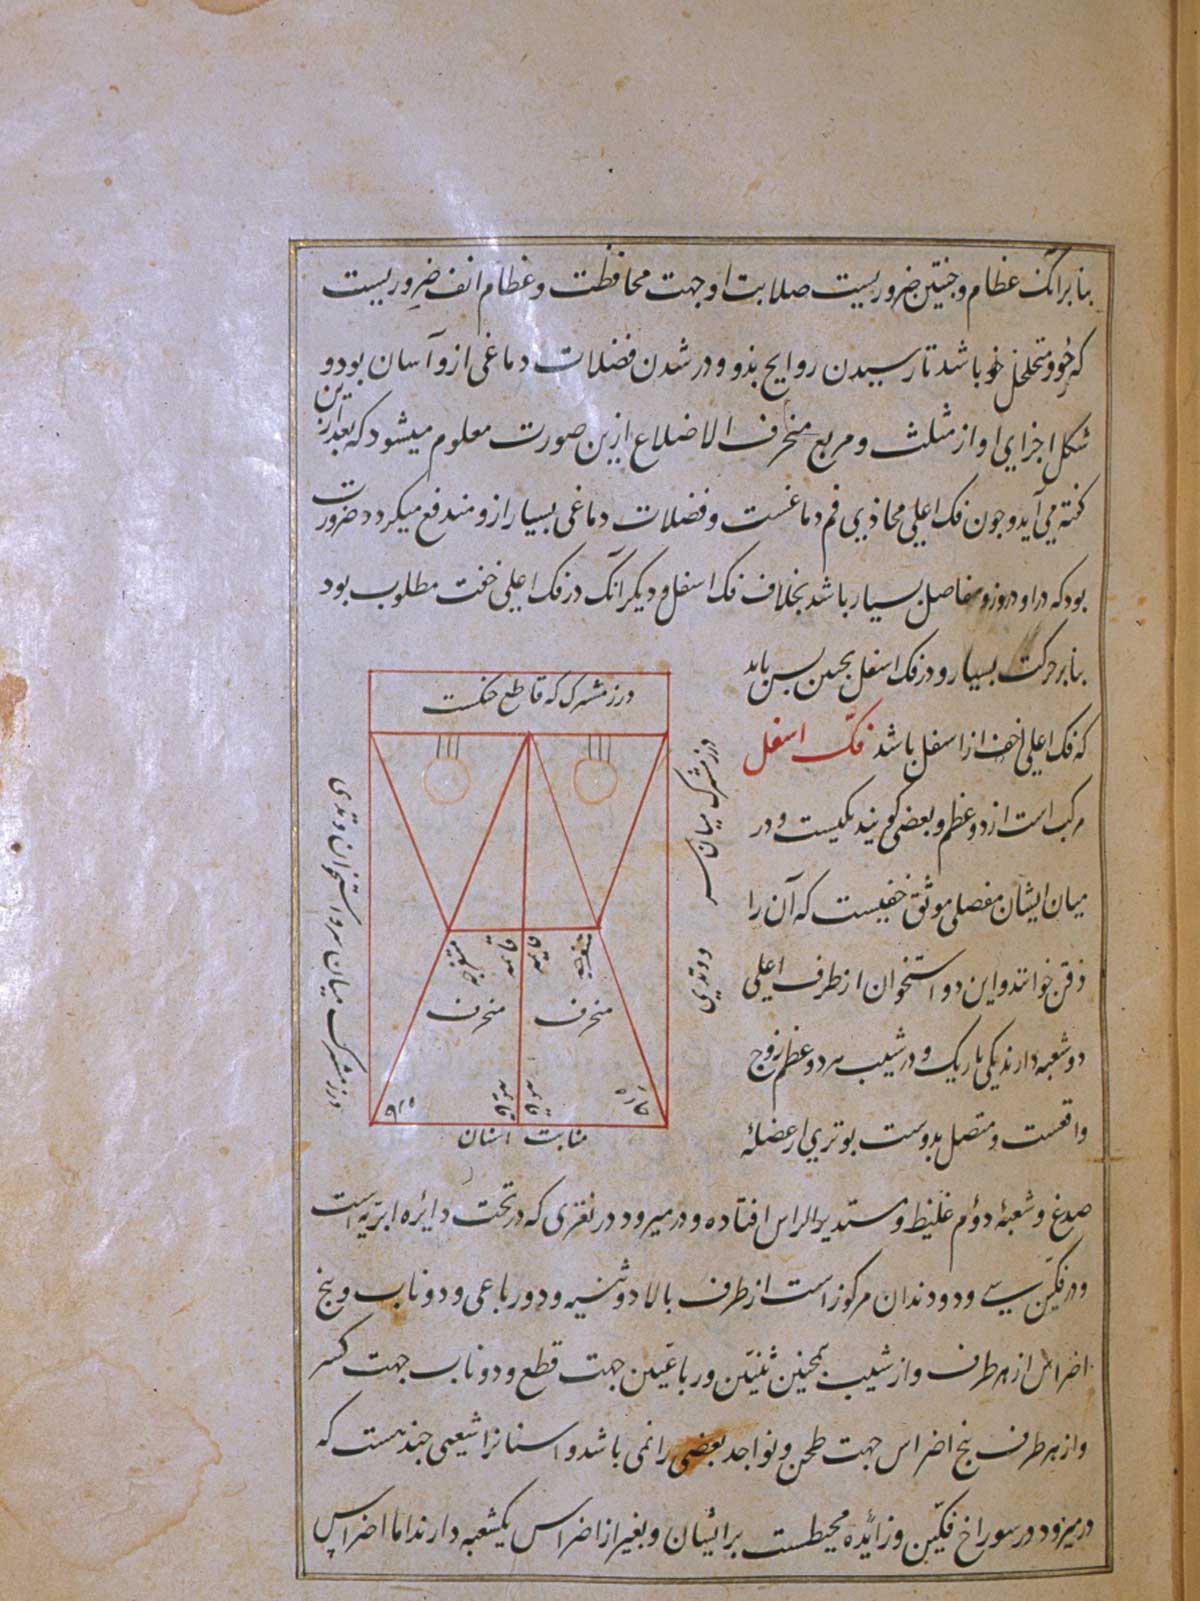 Folio 8a of Mansur ibn Ilyas' Tashrih-i badan-i insan, featuring a schematic inked diagram of the bones of the upper jaw (maxilla) with the positions of the teeth indicated.